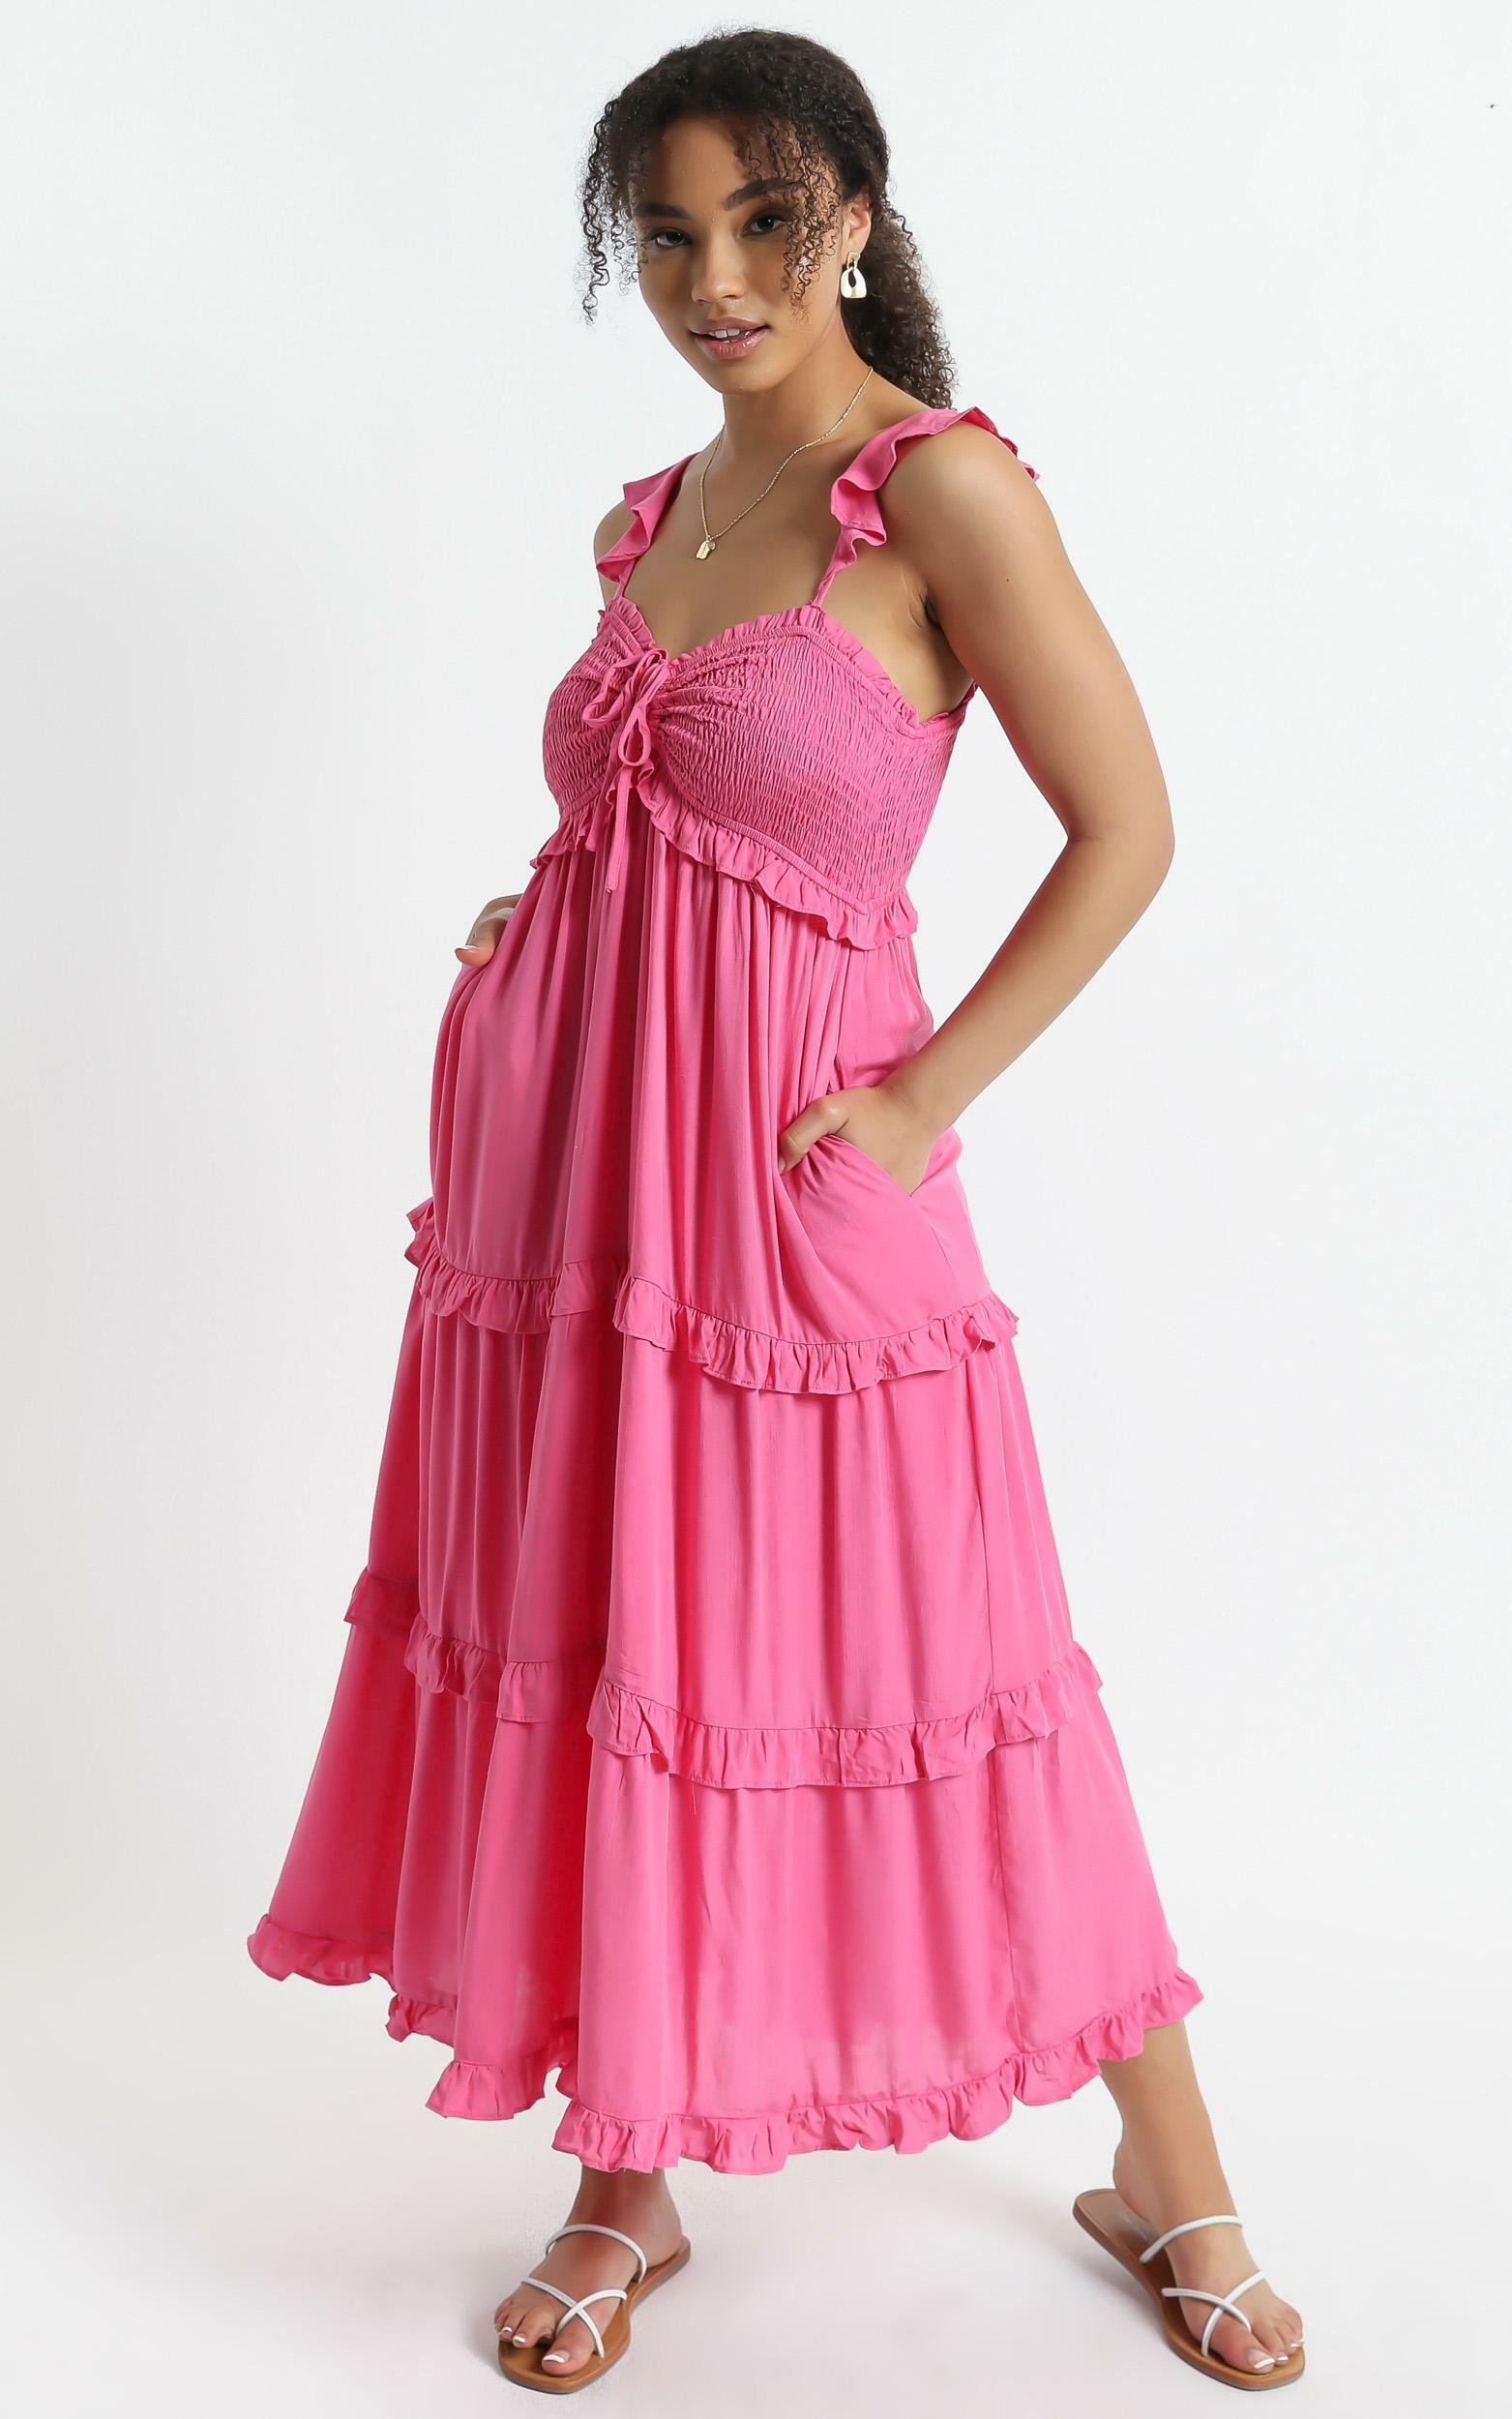 Good For The Soul Dress in Pink - 06, PNK3, hi-res image number null